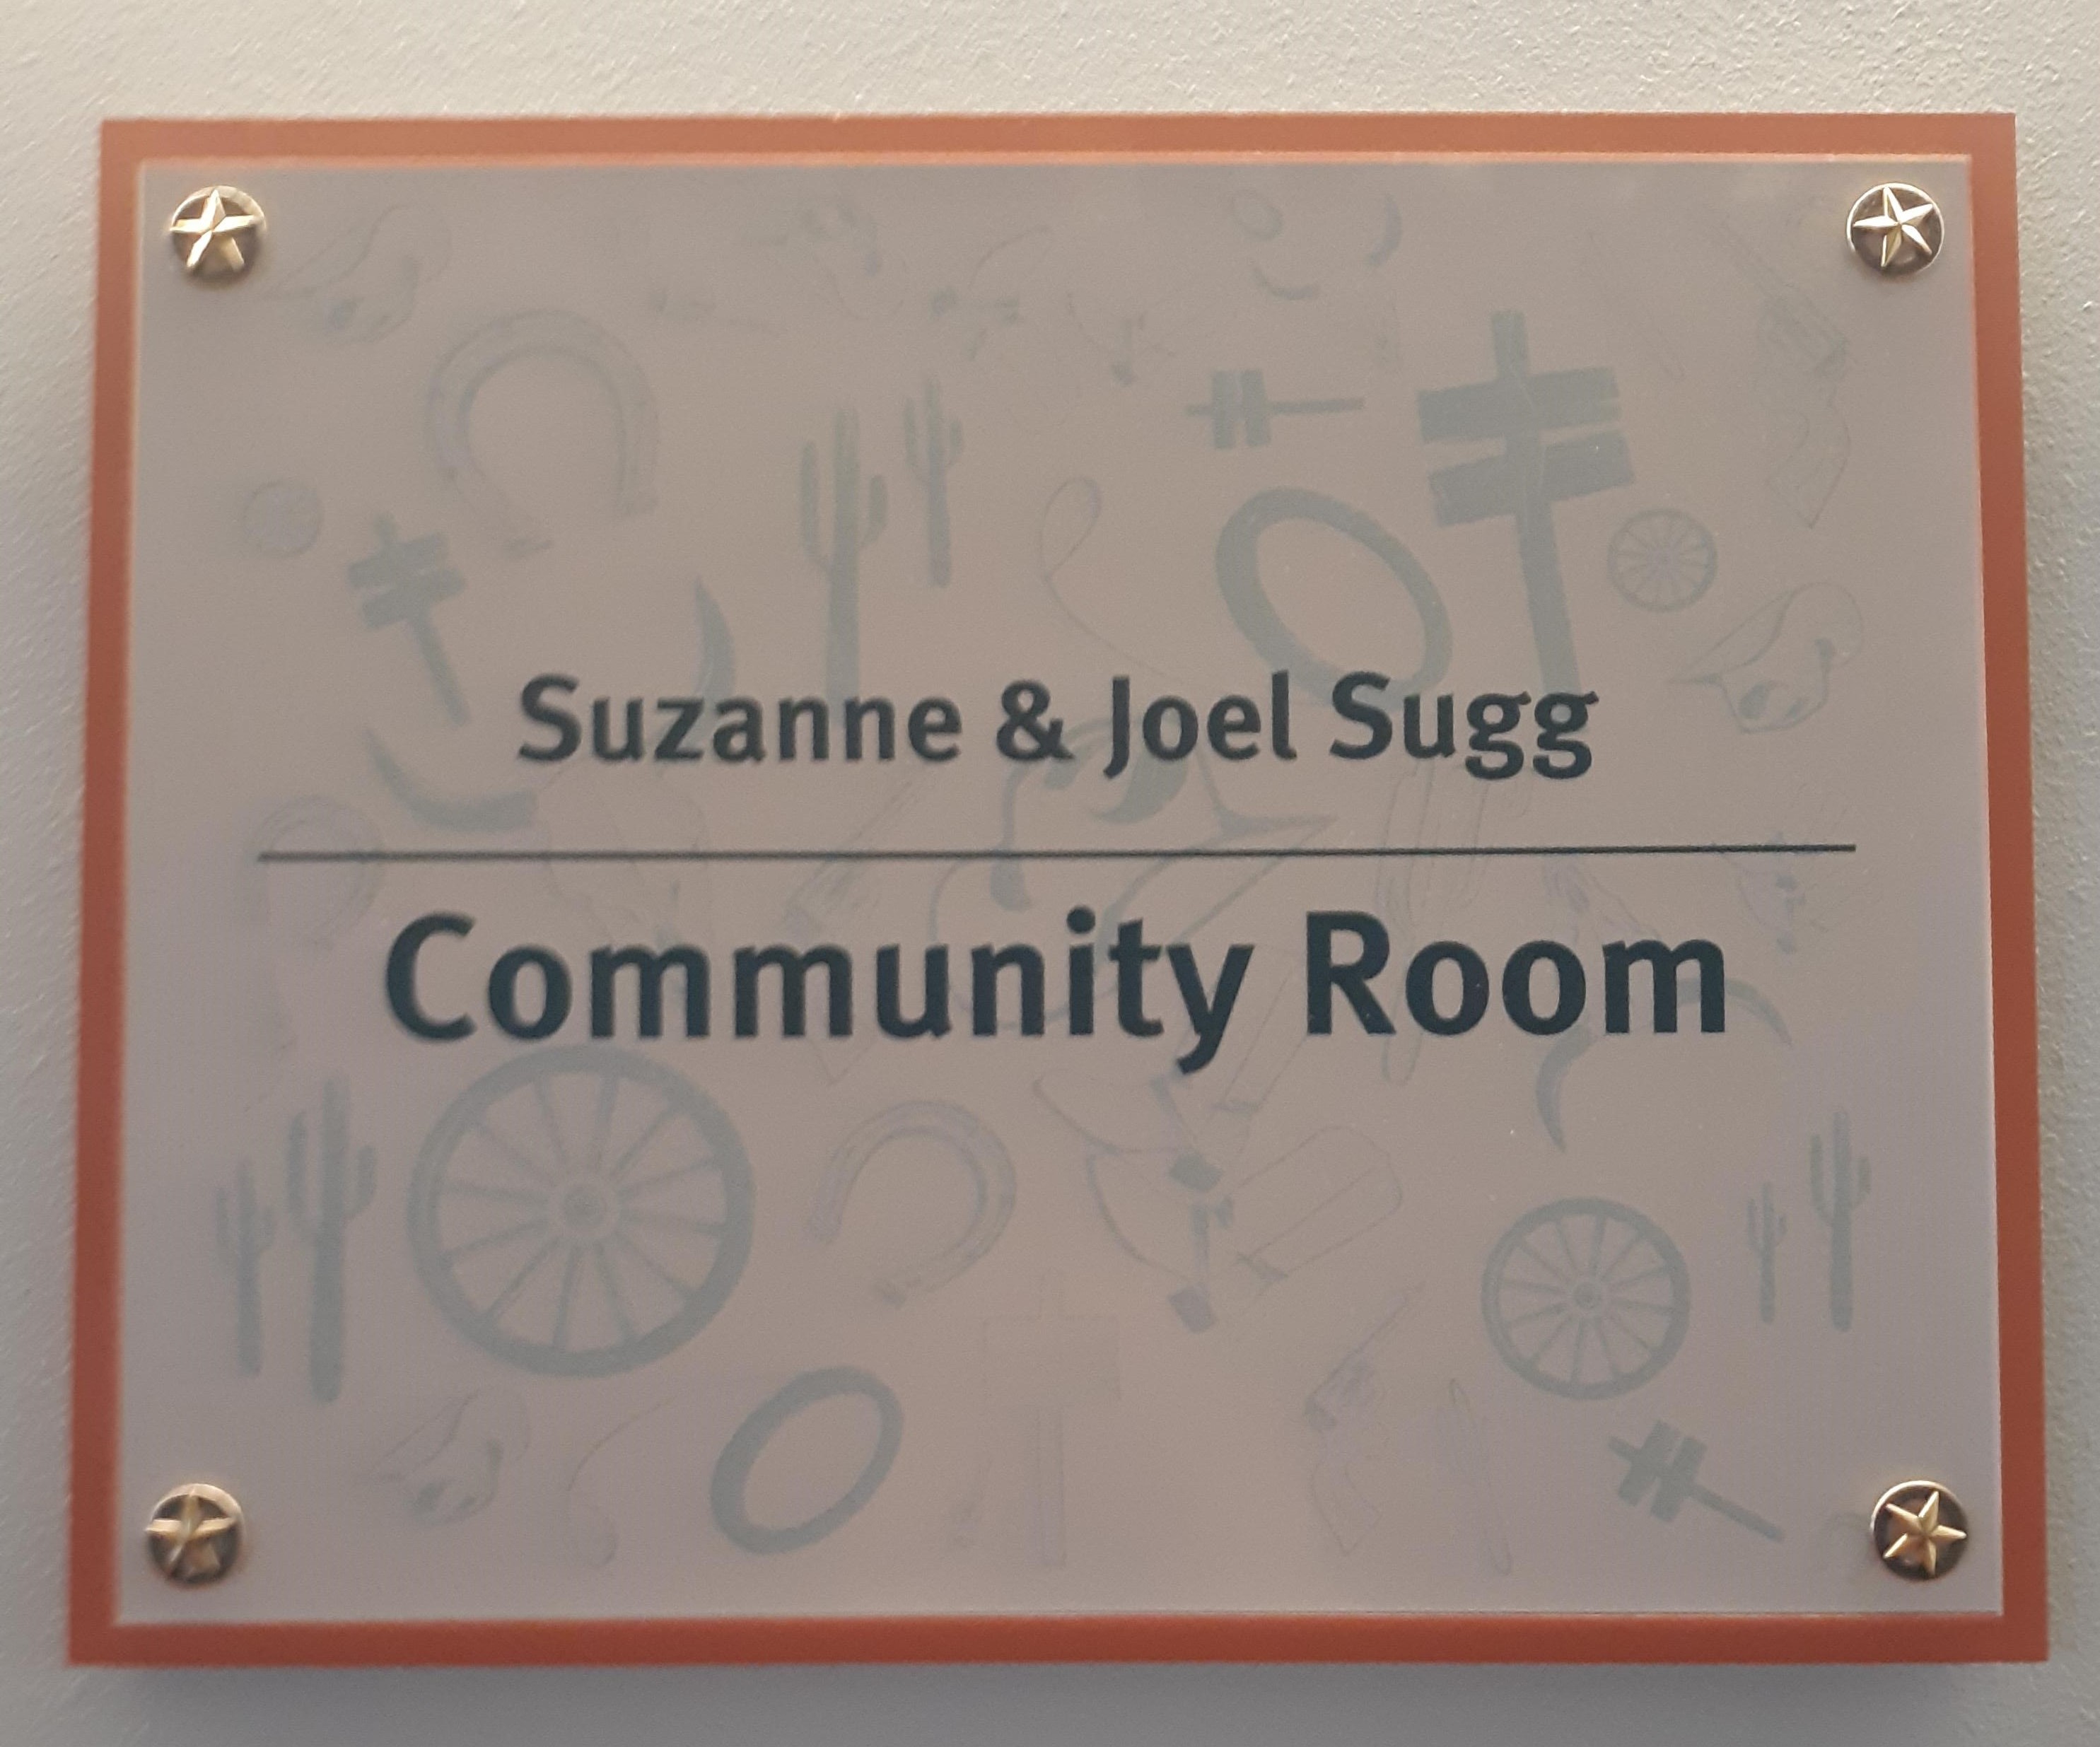 Suzanne and Joel Sugg Community Room name plate